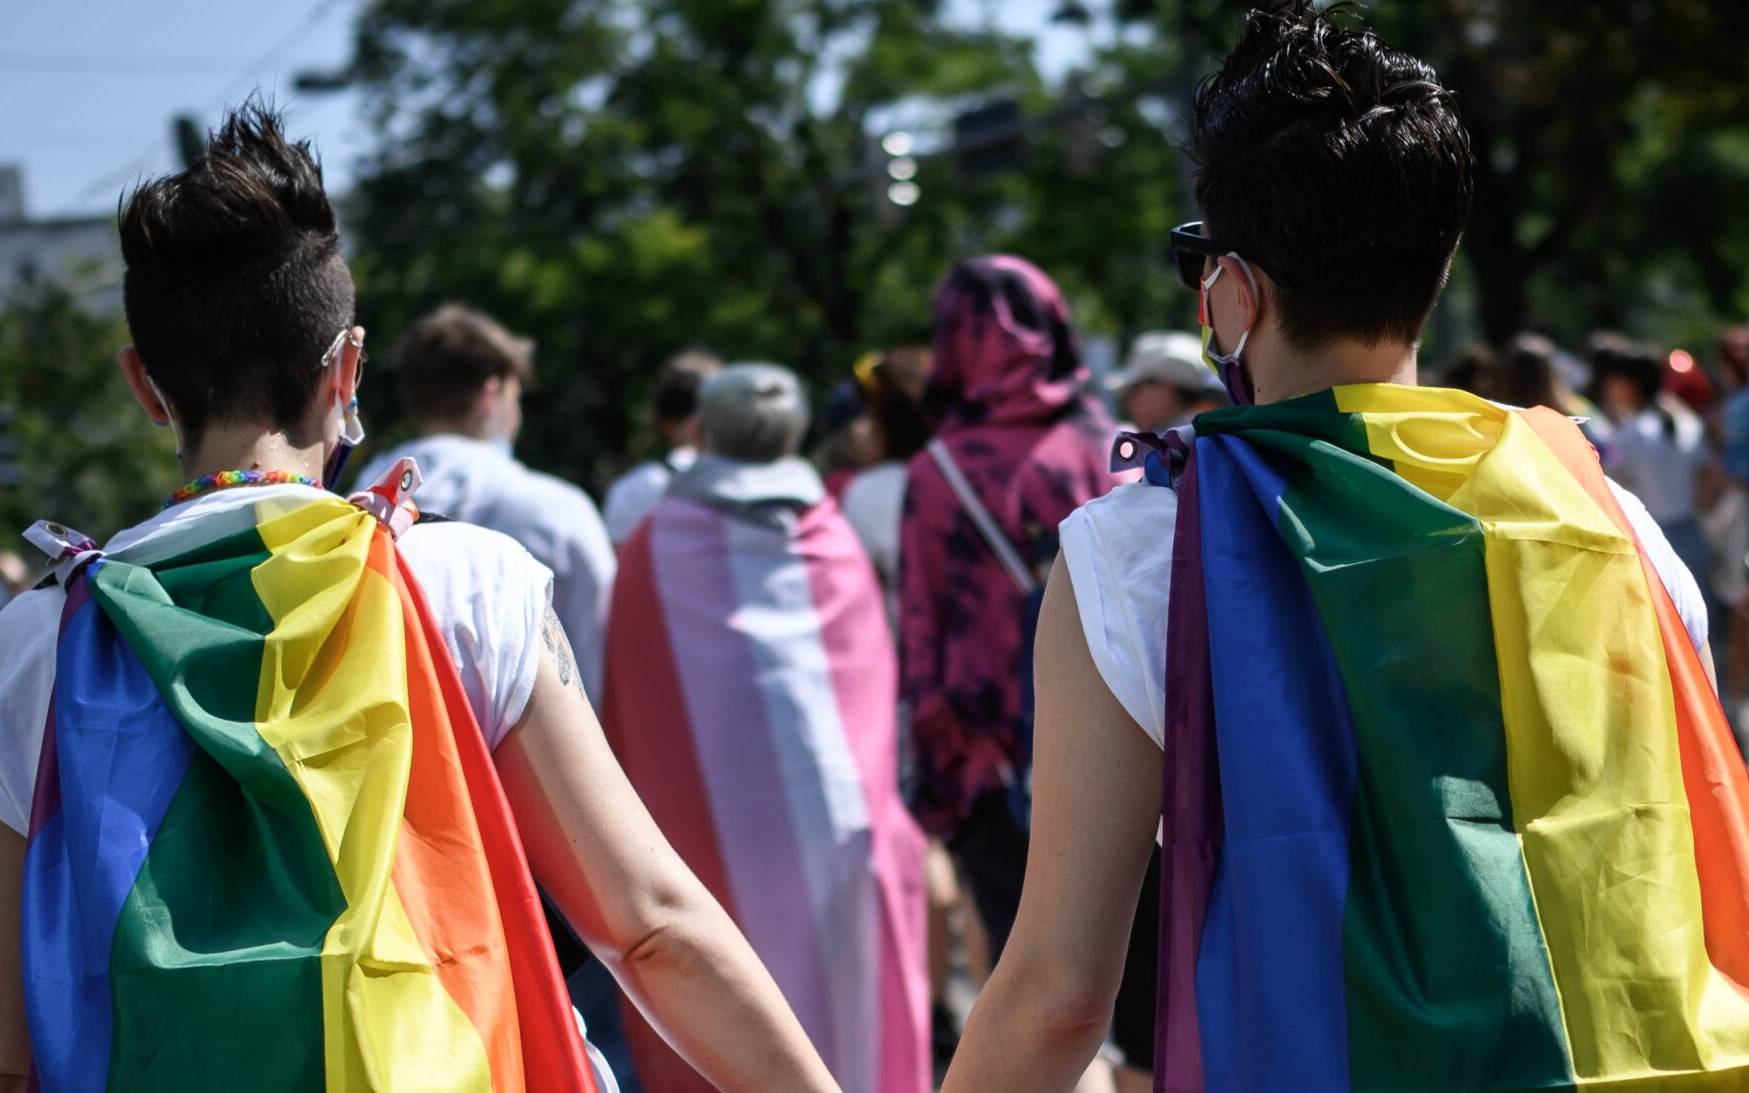 Members of lesbian, gay, bisexual, transgender, intersex and queer (LGBTIQ) community take part in the Zurich Pride on September 4, 2021 ahead of a nationwide votation on the marriage for all. - Swiss citizens are due to vote on September 26, 2021 to determine whether the right to marry should be extended to same-sex couples or not. (Photo by FABRICE COFFRINI / AFP)